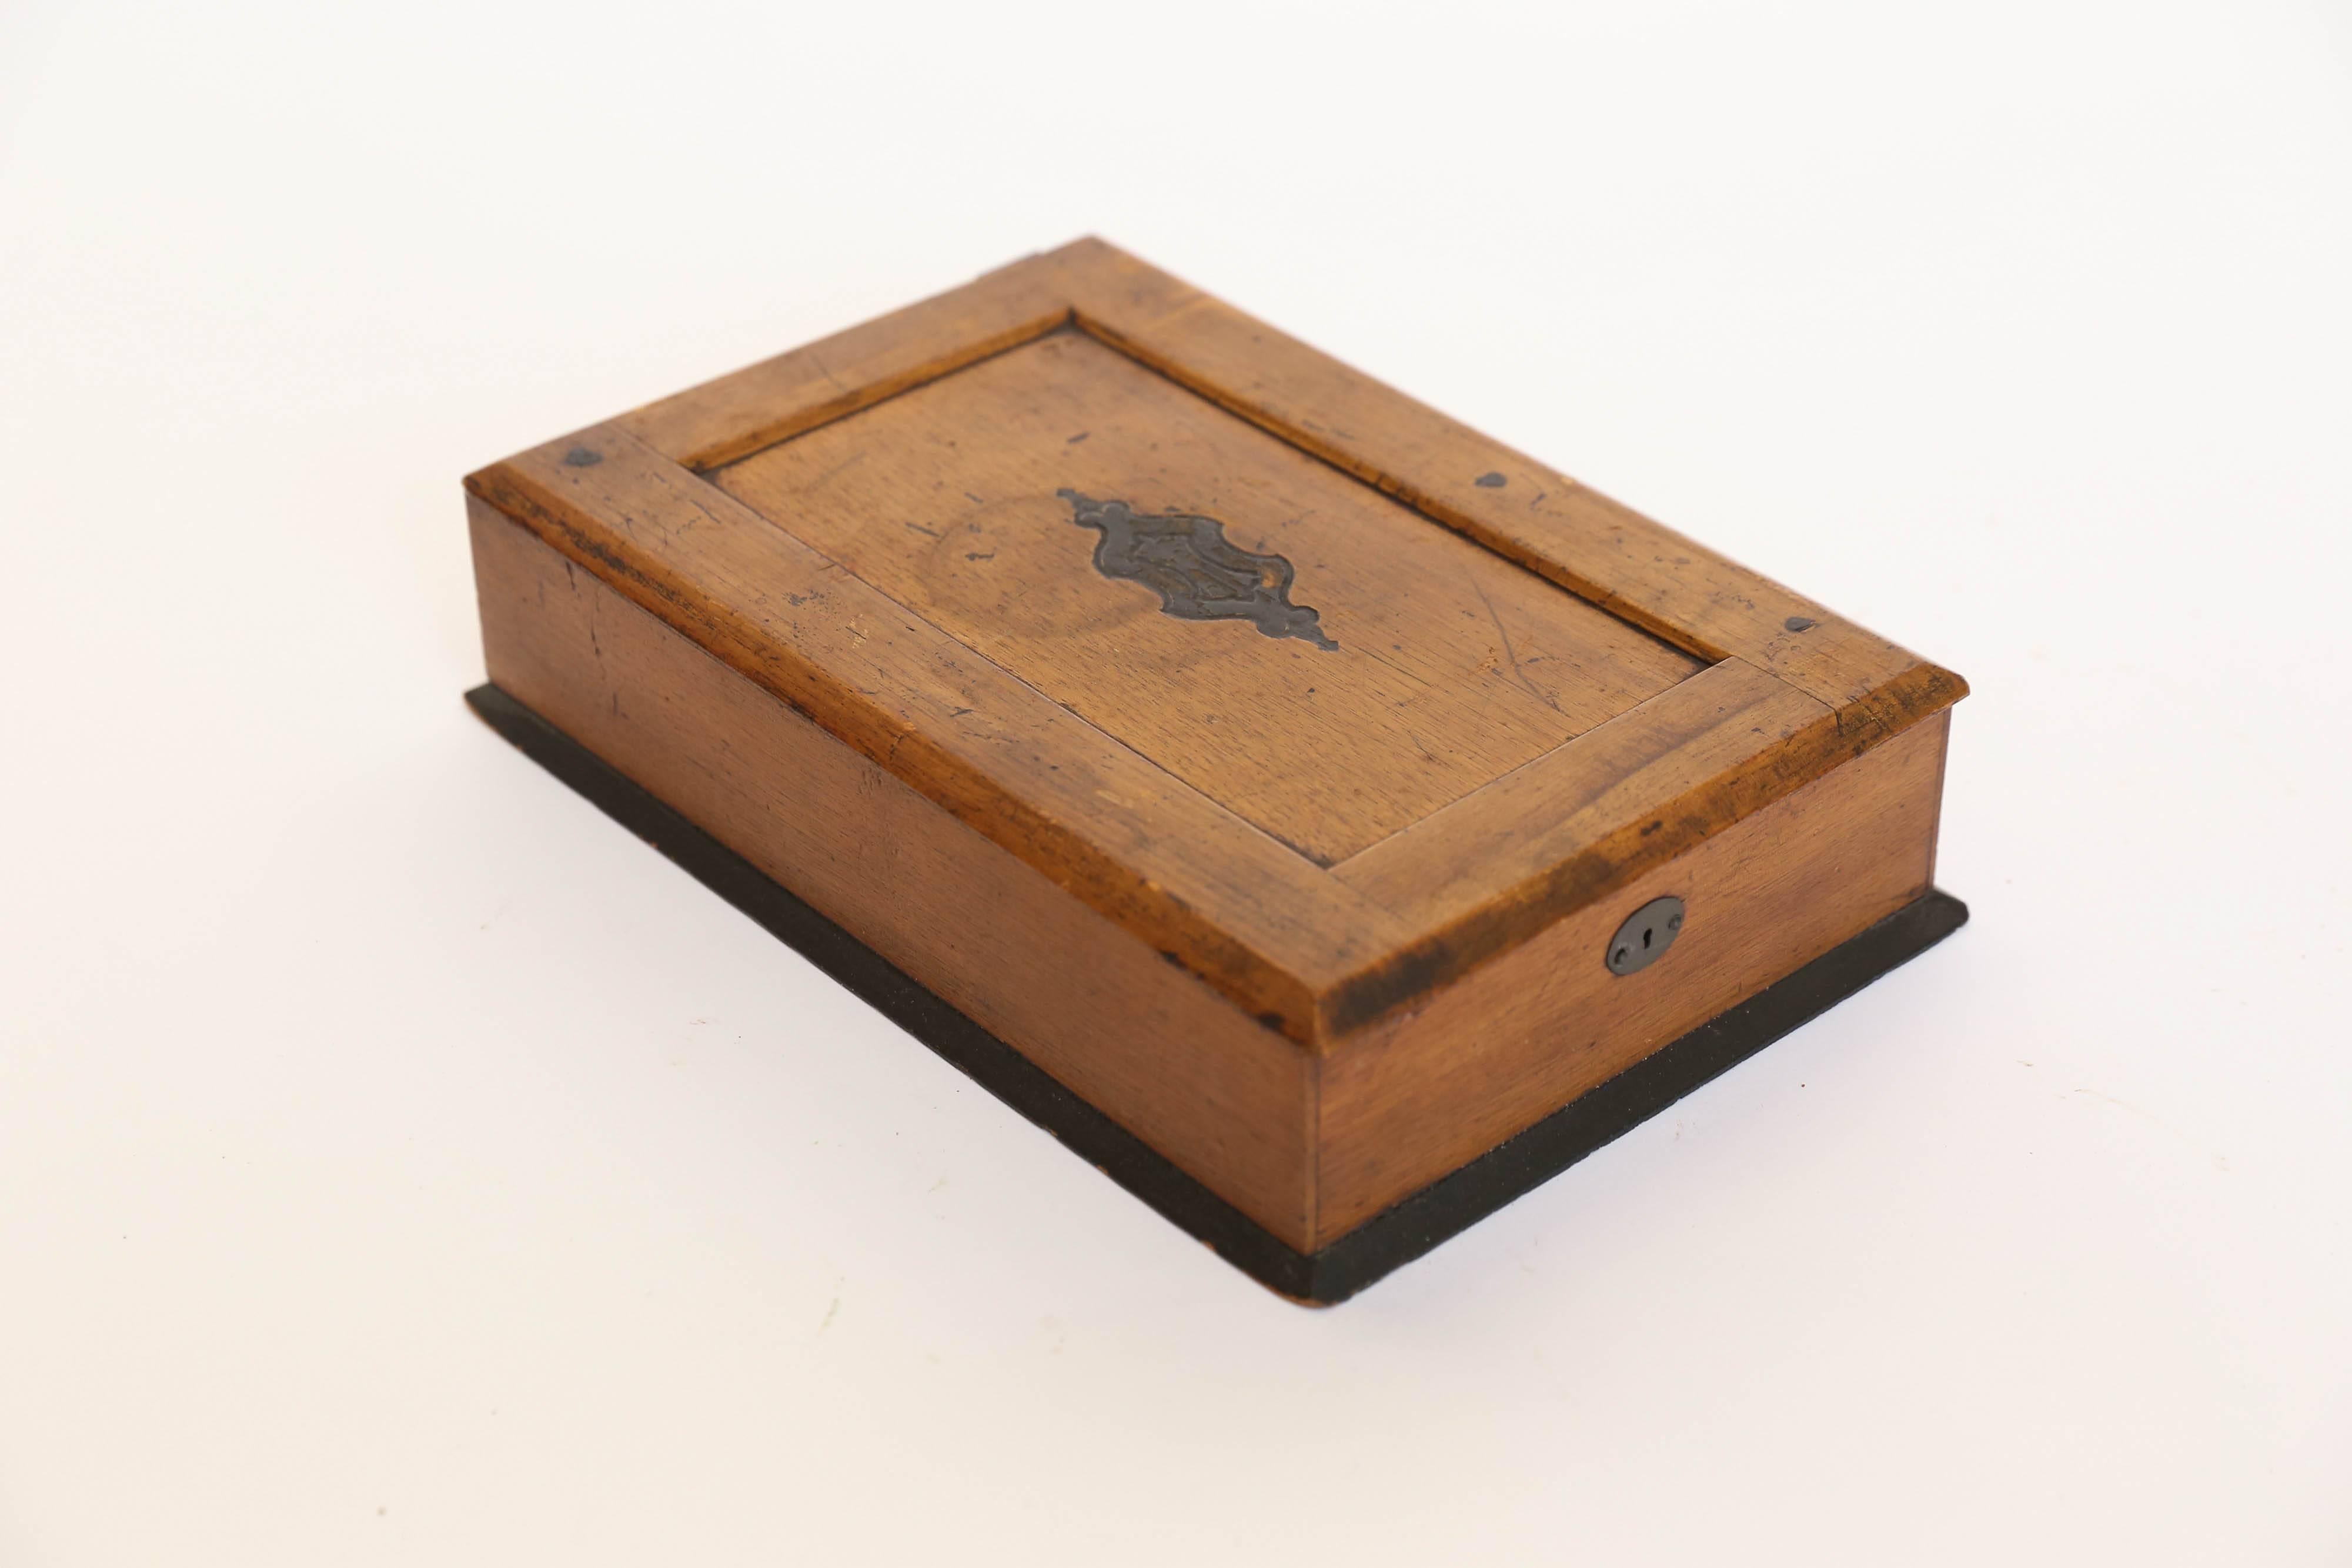 An old writing box found with a treasured bible and an exquisite pair of wire-rimmed glasses tucked neatly inside. The box is obviously earlier than the bible, which is dated 1953, while the glasses are likely the oldest item in the group. The